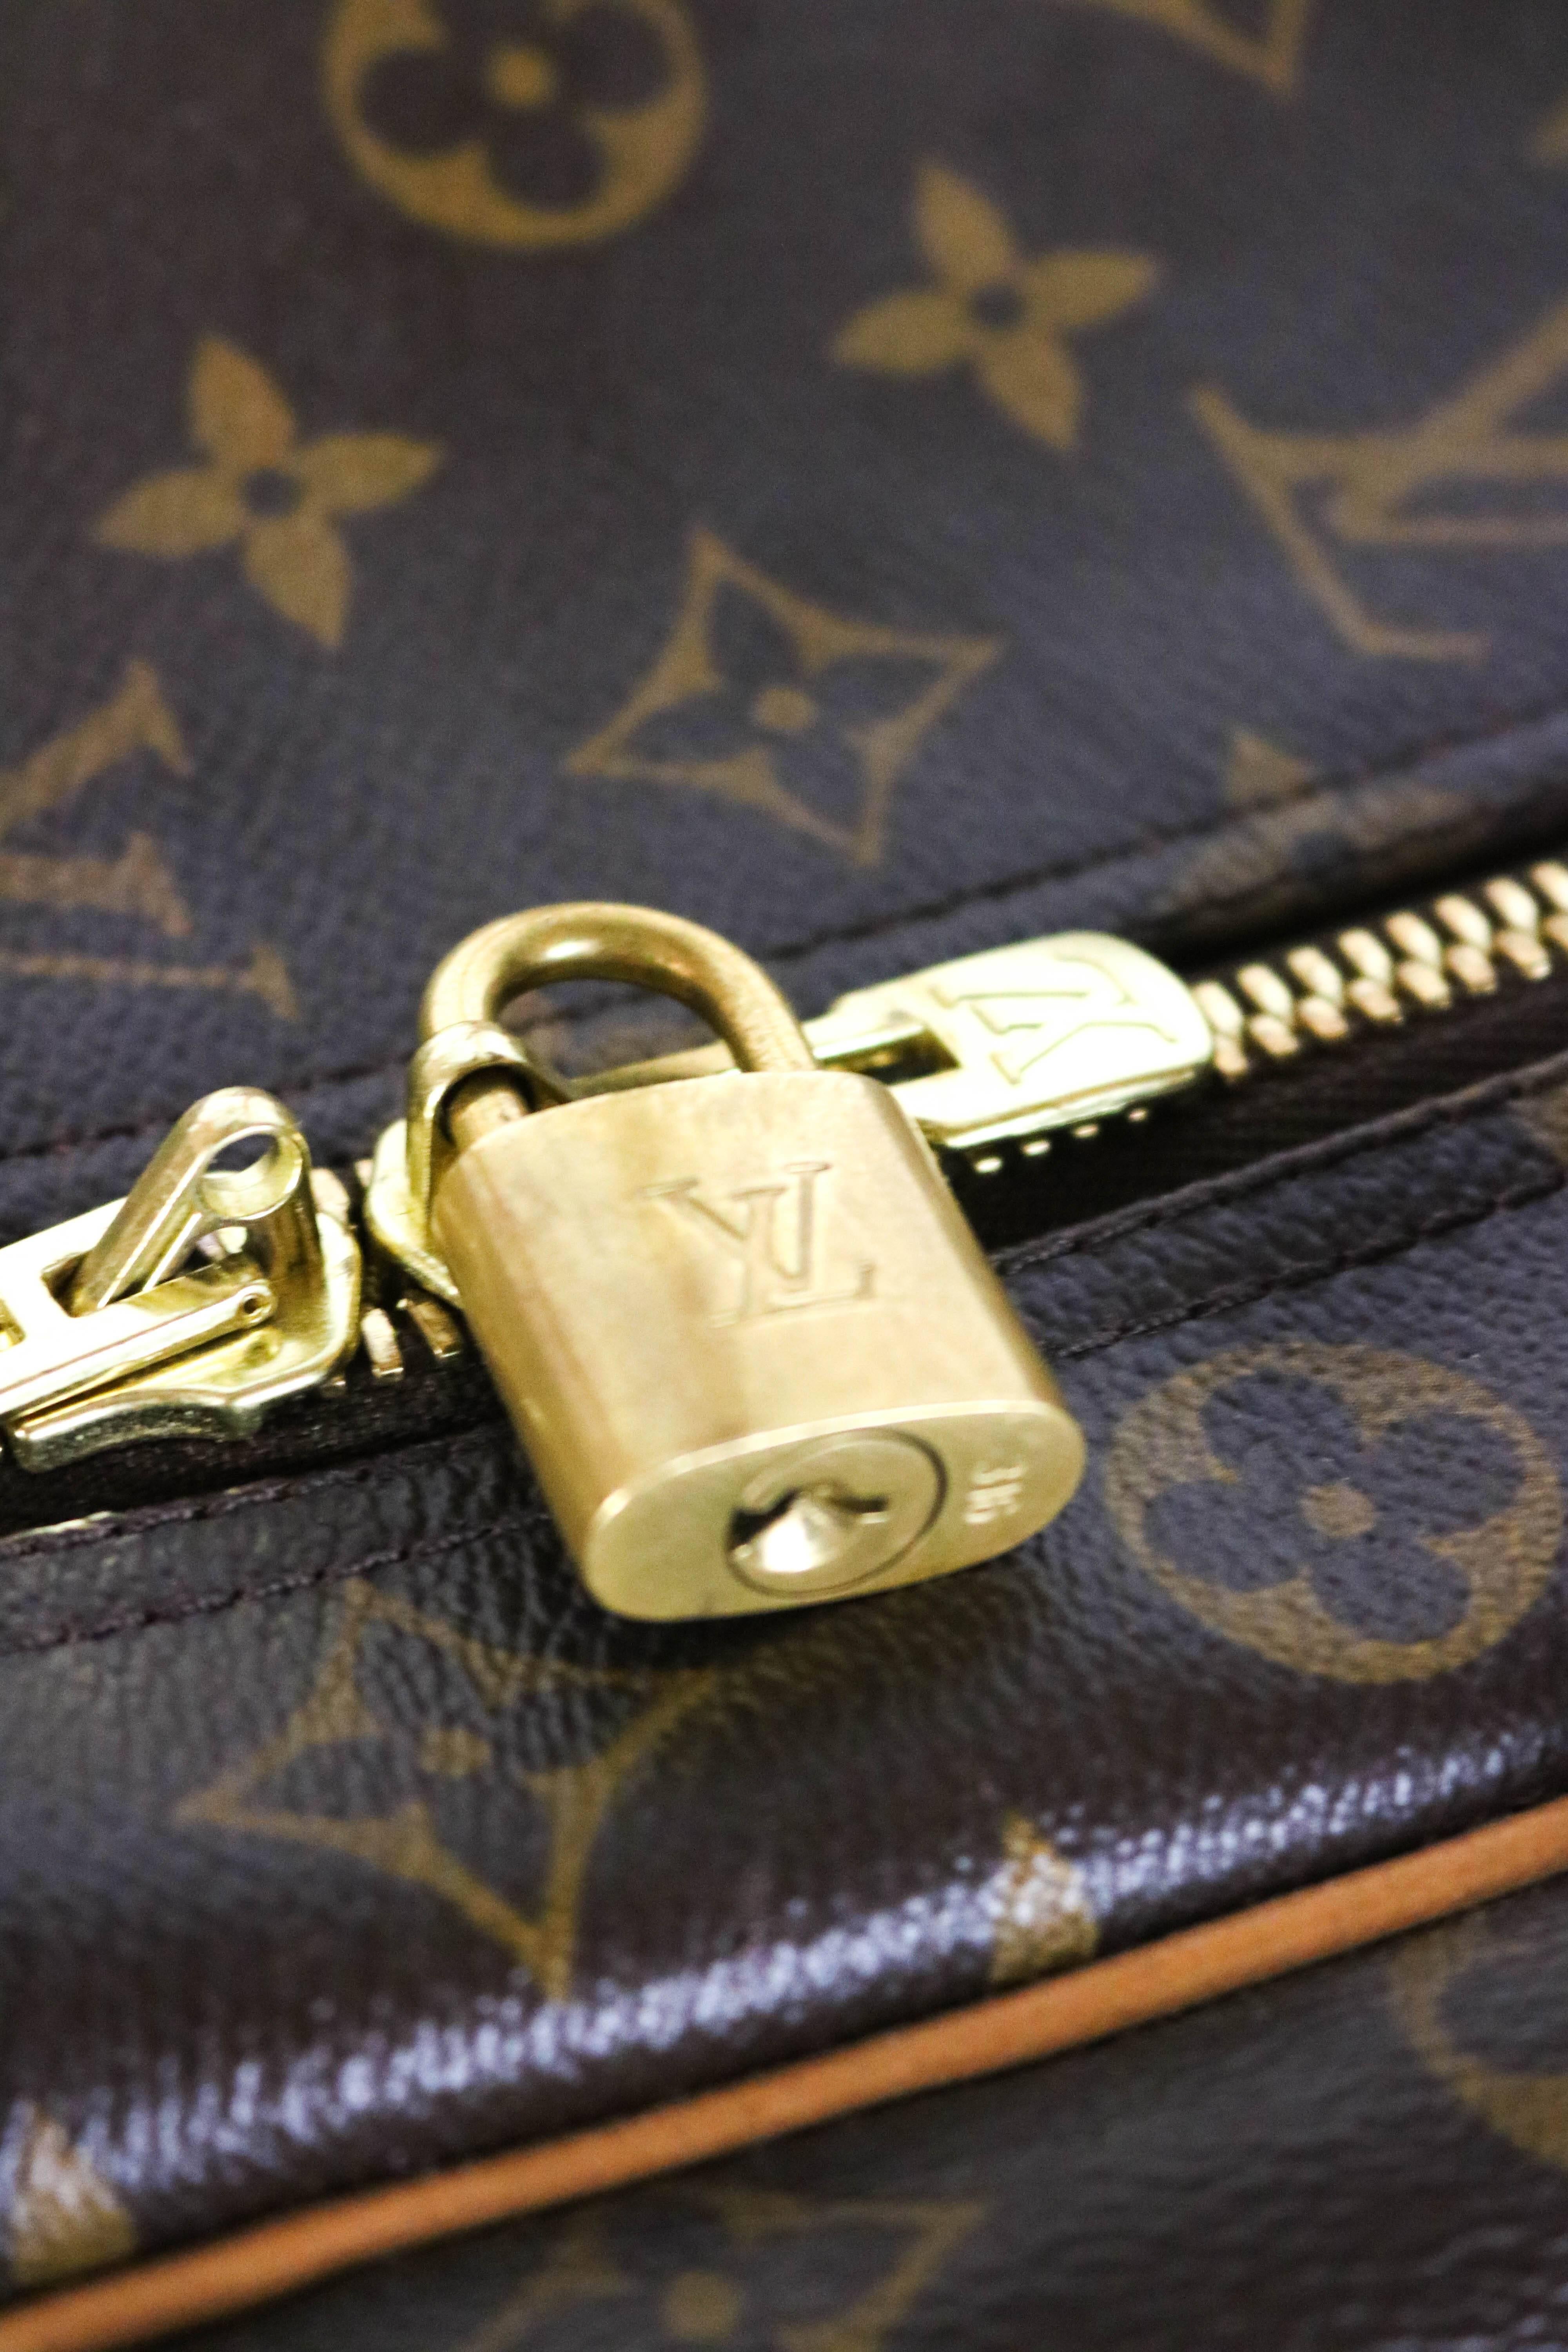 Offered is an Authentic Monogram Canvas Louis Vuitton soft sided suitcase from the travel collection. This piece measures 55 centimeters, reflecting the name 